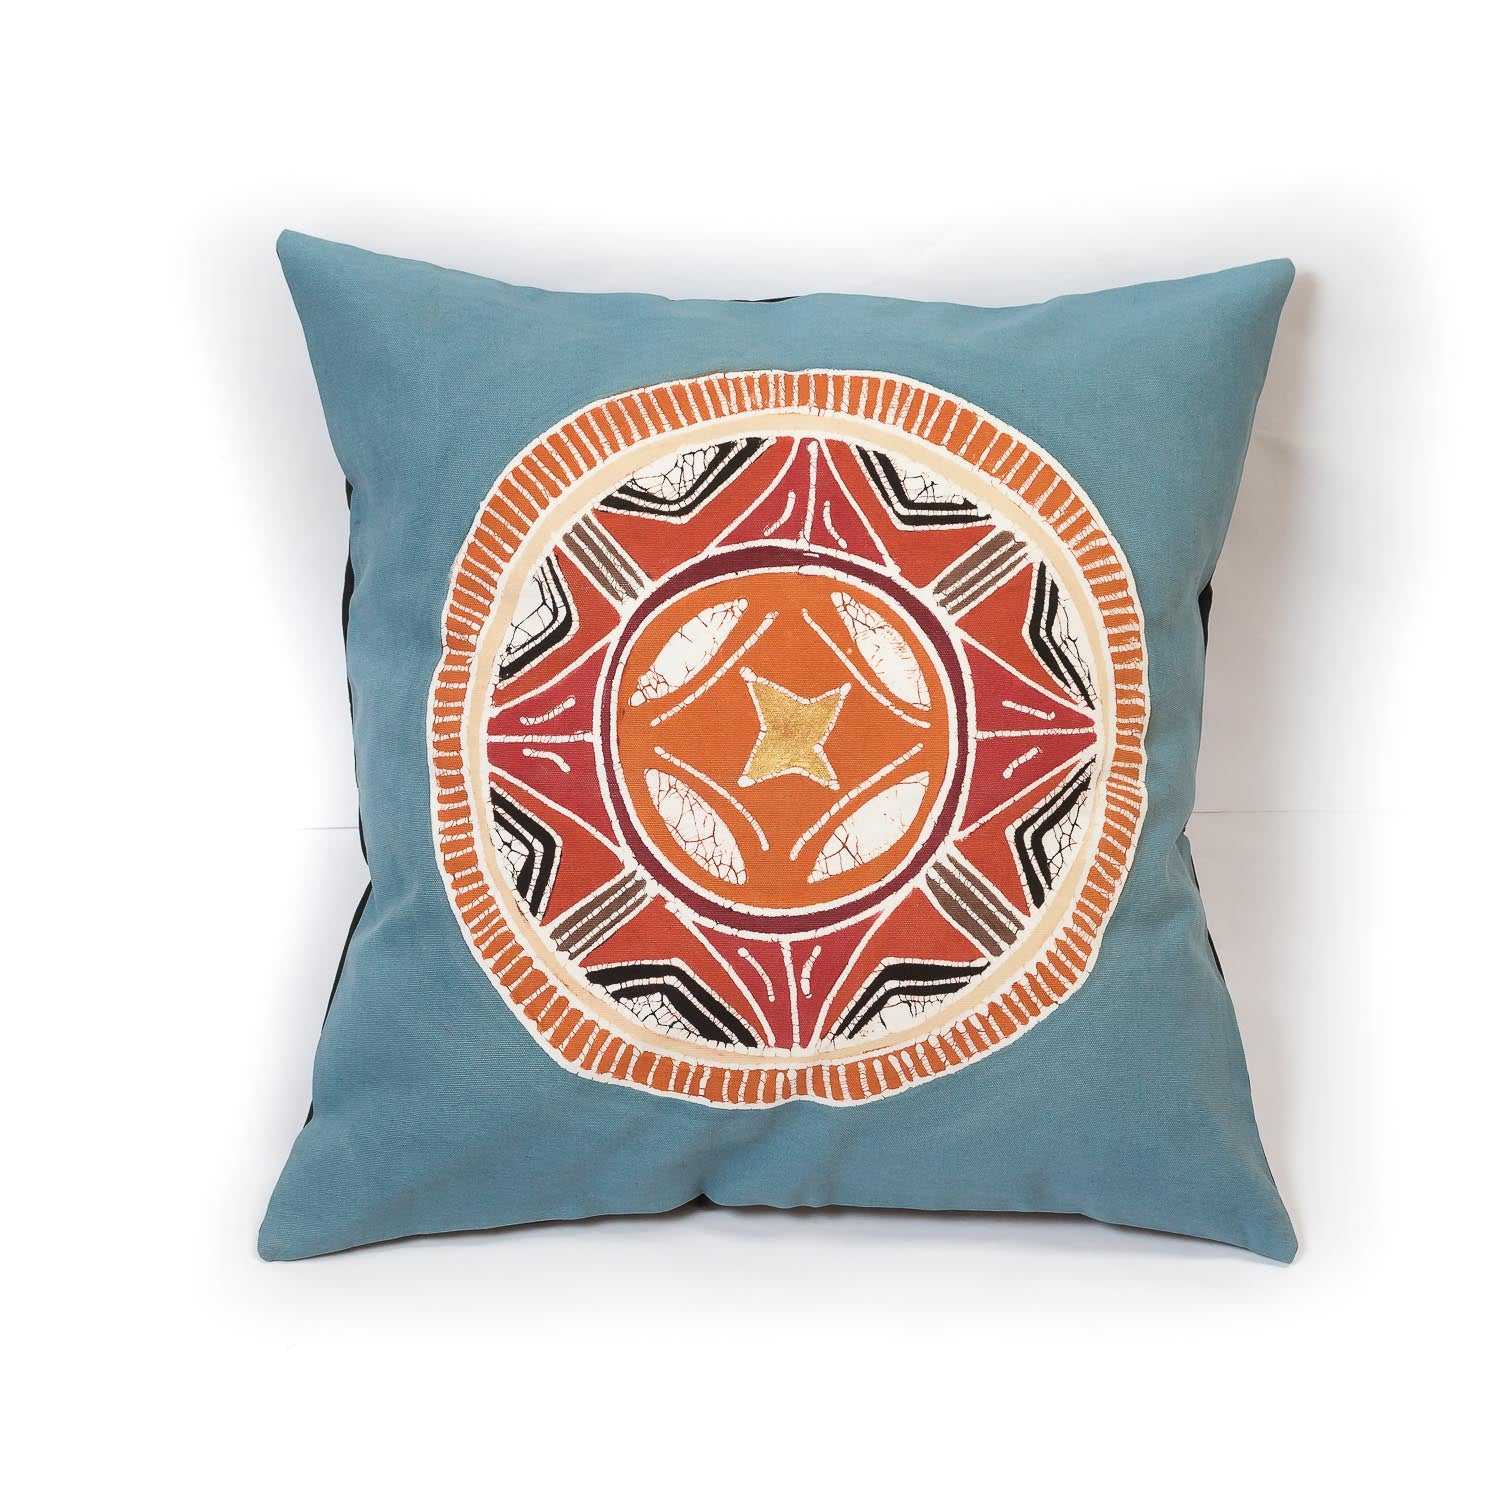 African Circles Massai Blue Cushion Cover - Handmade by TRIBAL TEXTILES - Handcrafted Home Decor Interiors - African Made